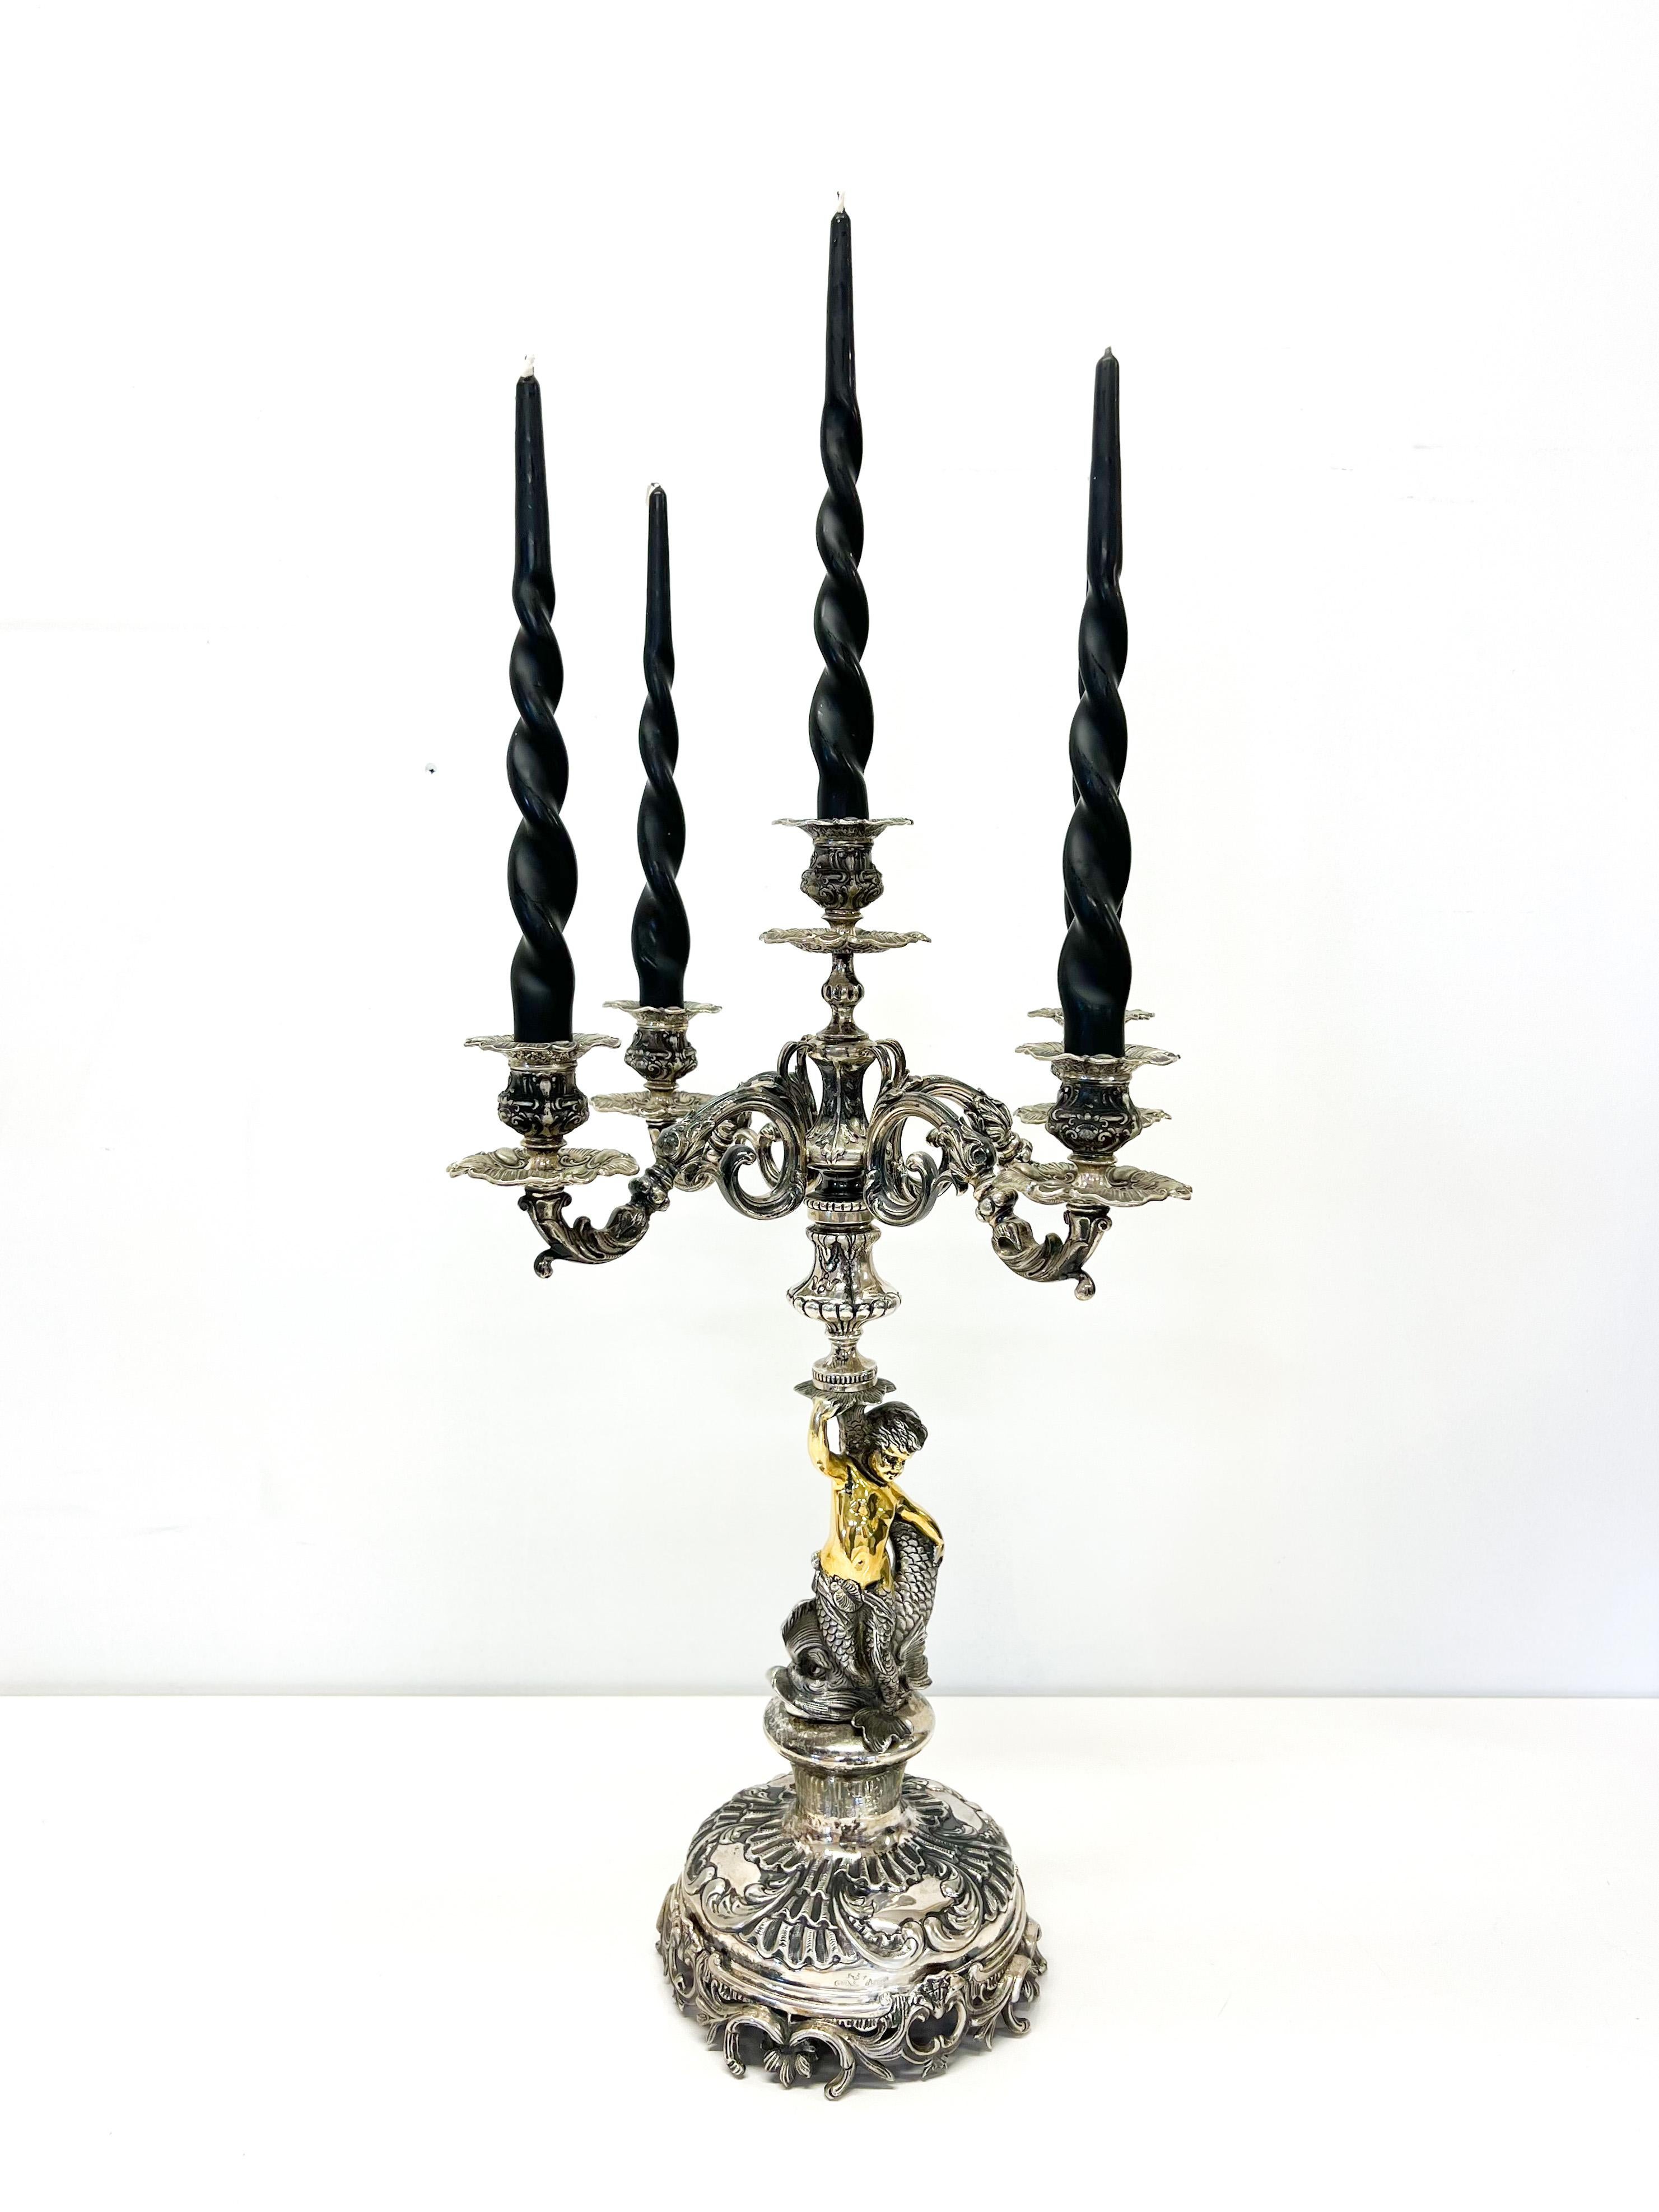 A Five-Branched Candelabrum
The silver candlestick, which rises to a height of more than half a meter and weighs 3.364 kilograms, is supported by a pair of carp and a golden two-tailed Merenmale. The boy character will represent the young Triton,